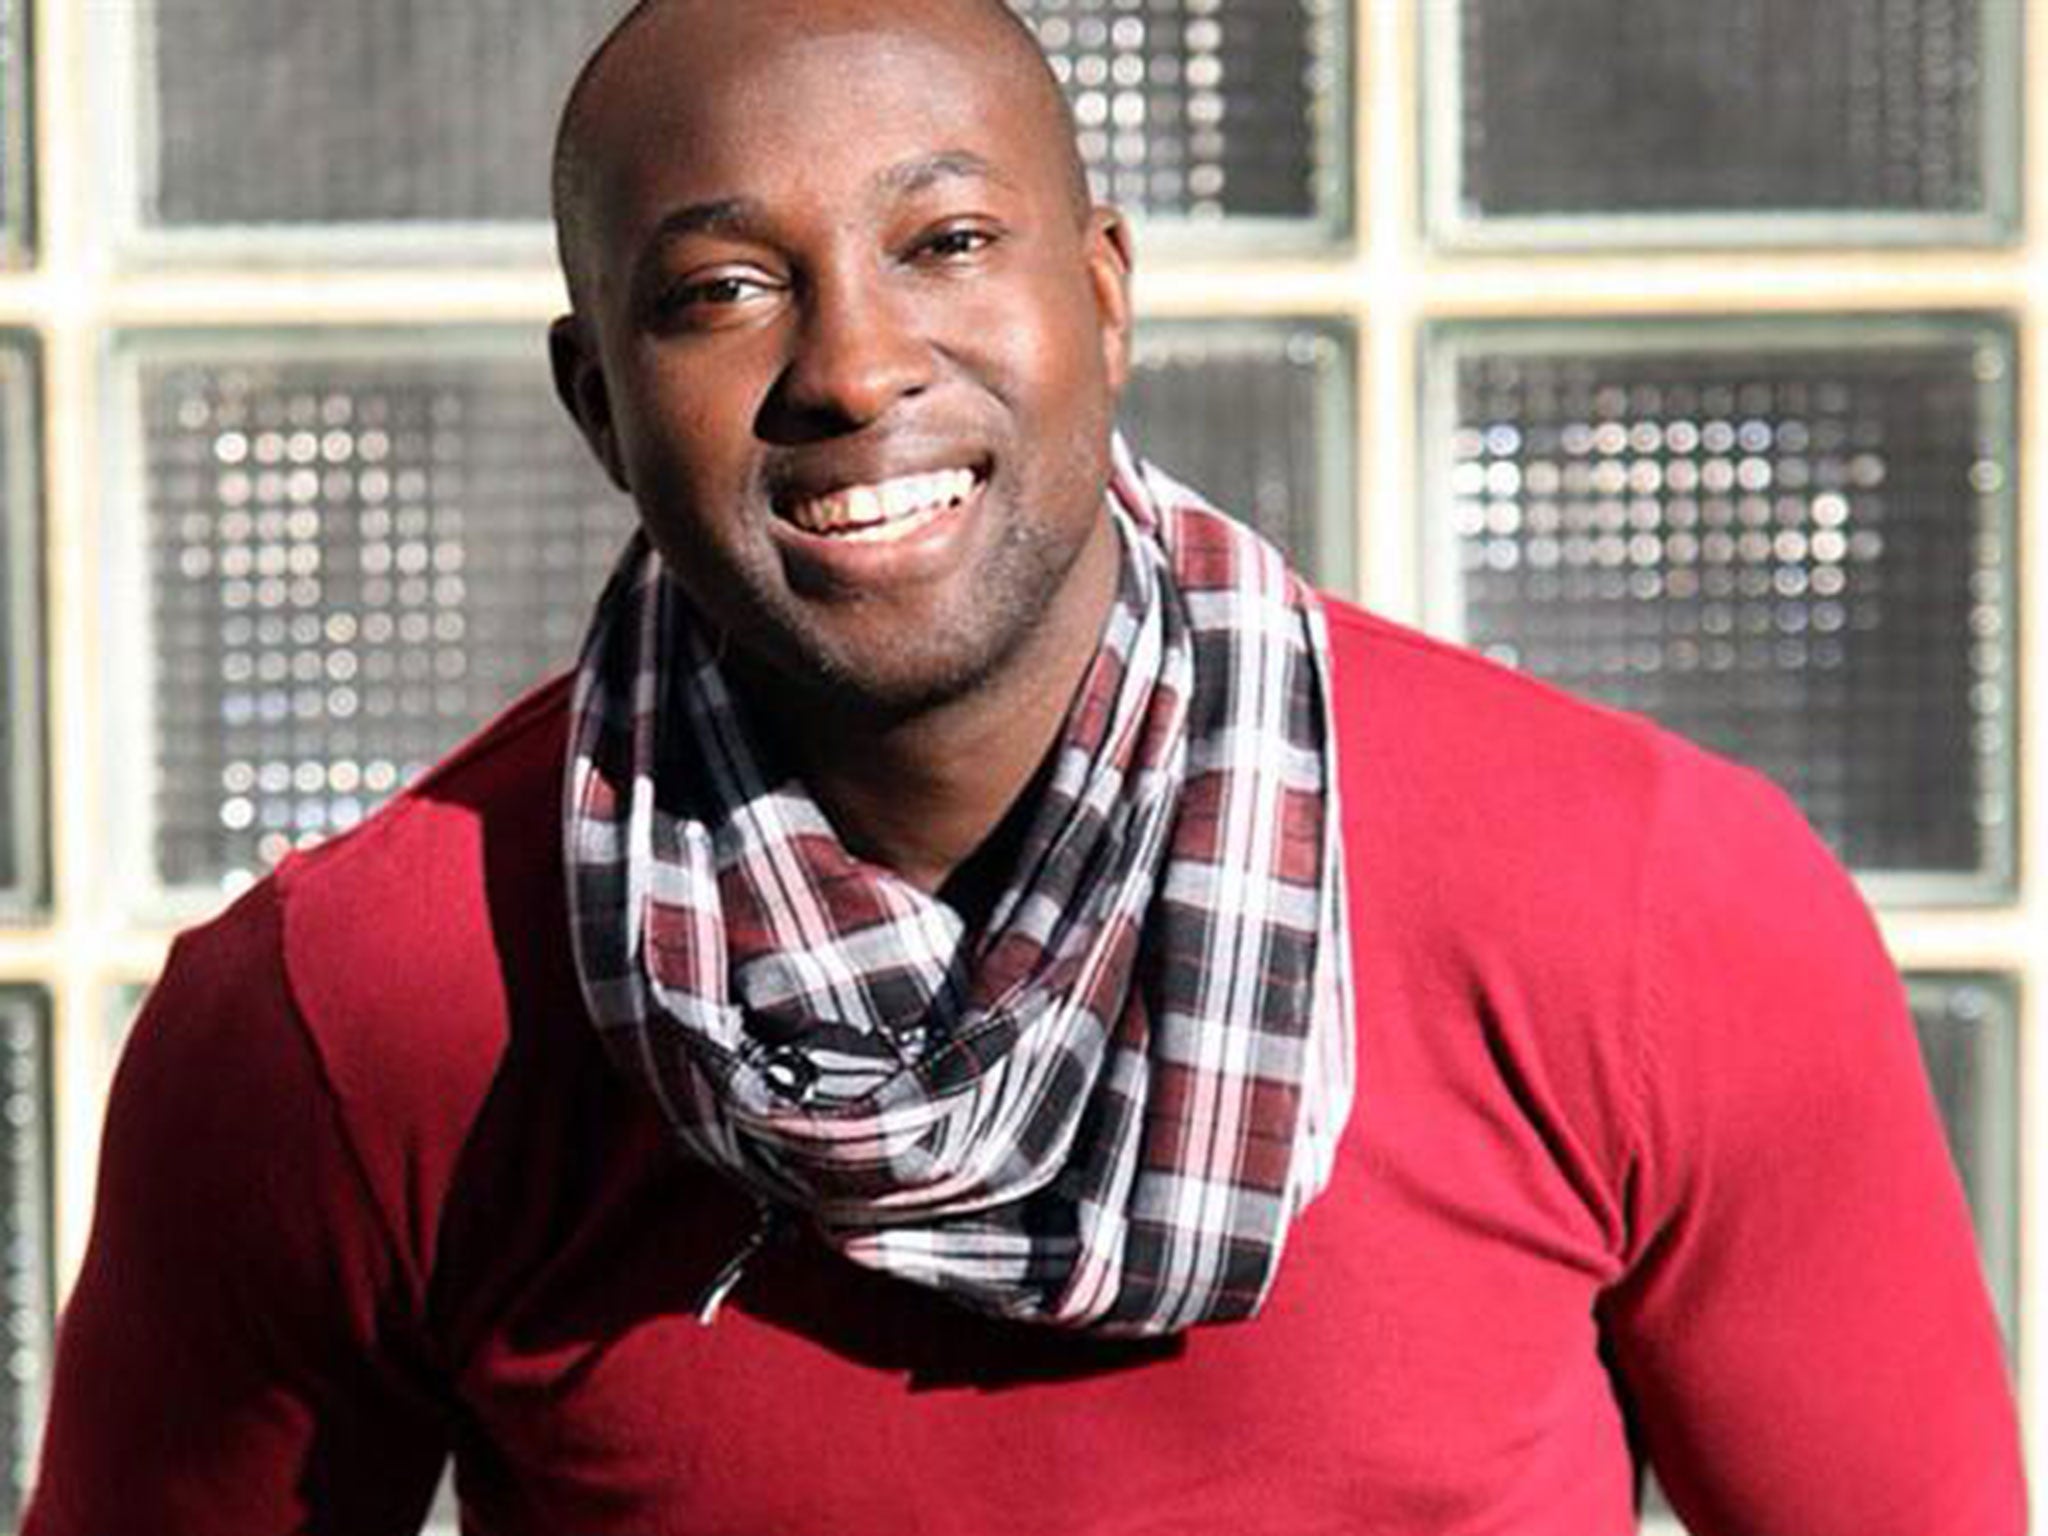 Simba Mhere died on 31 January 2015